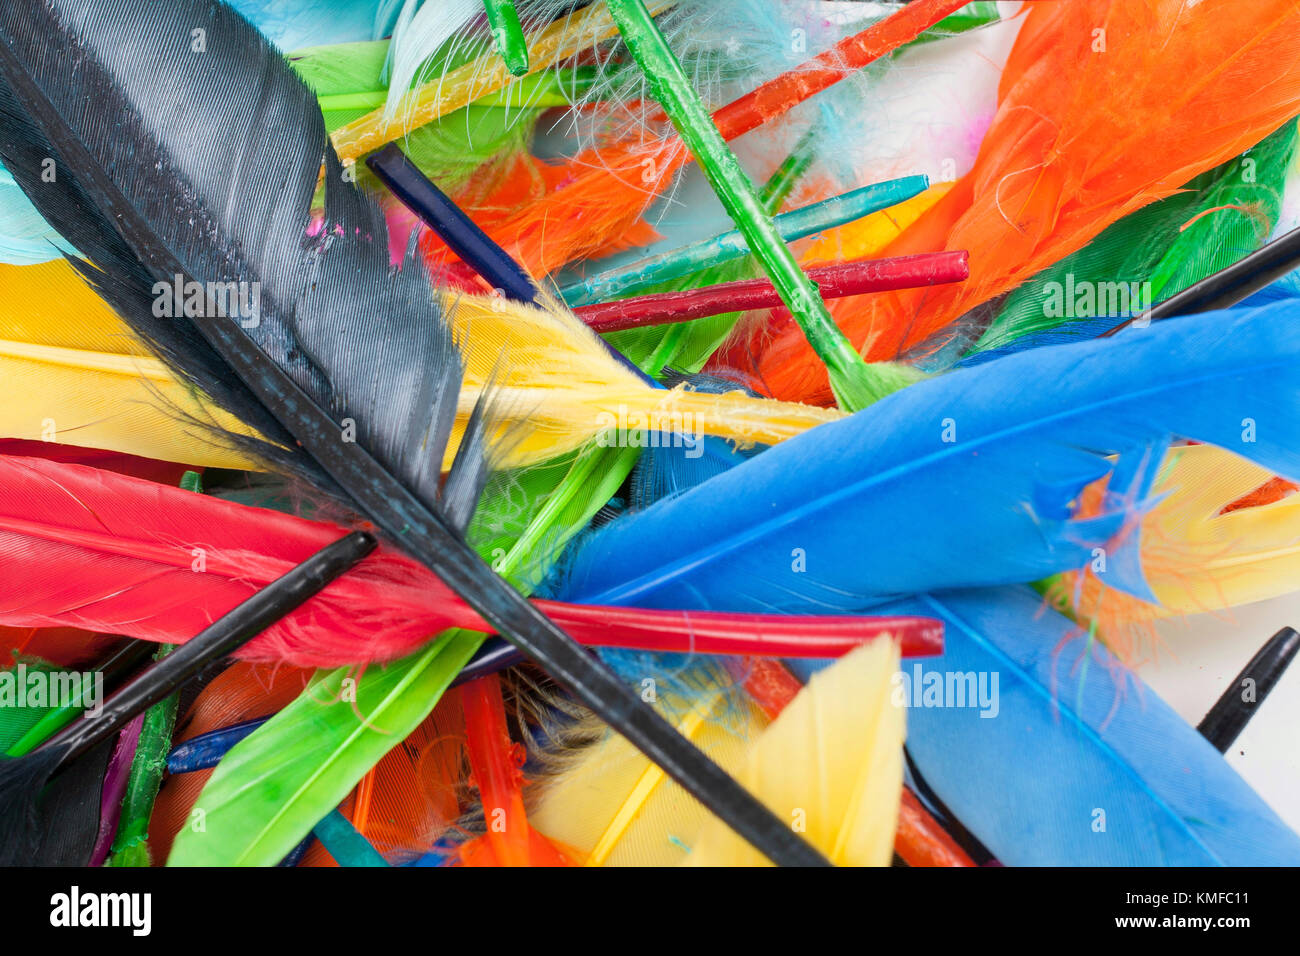 Jolly background of colored feathers Stock Photo by ©MamaPolina 68990387